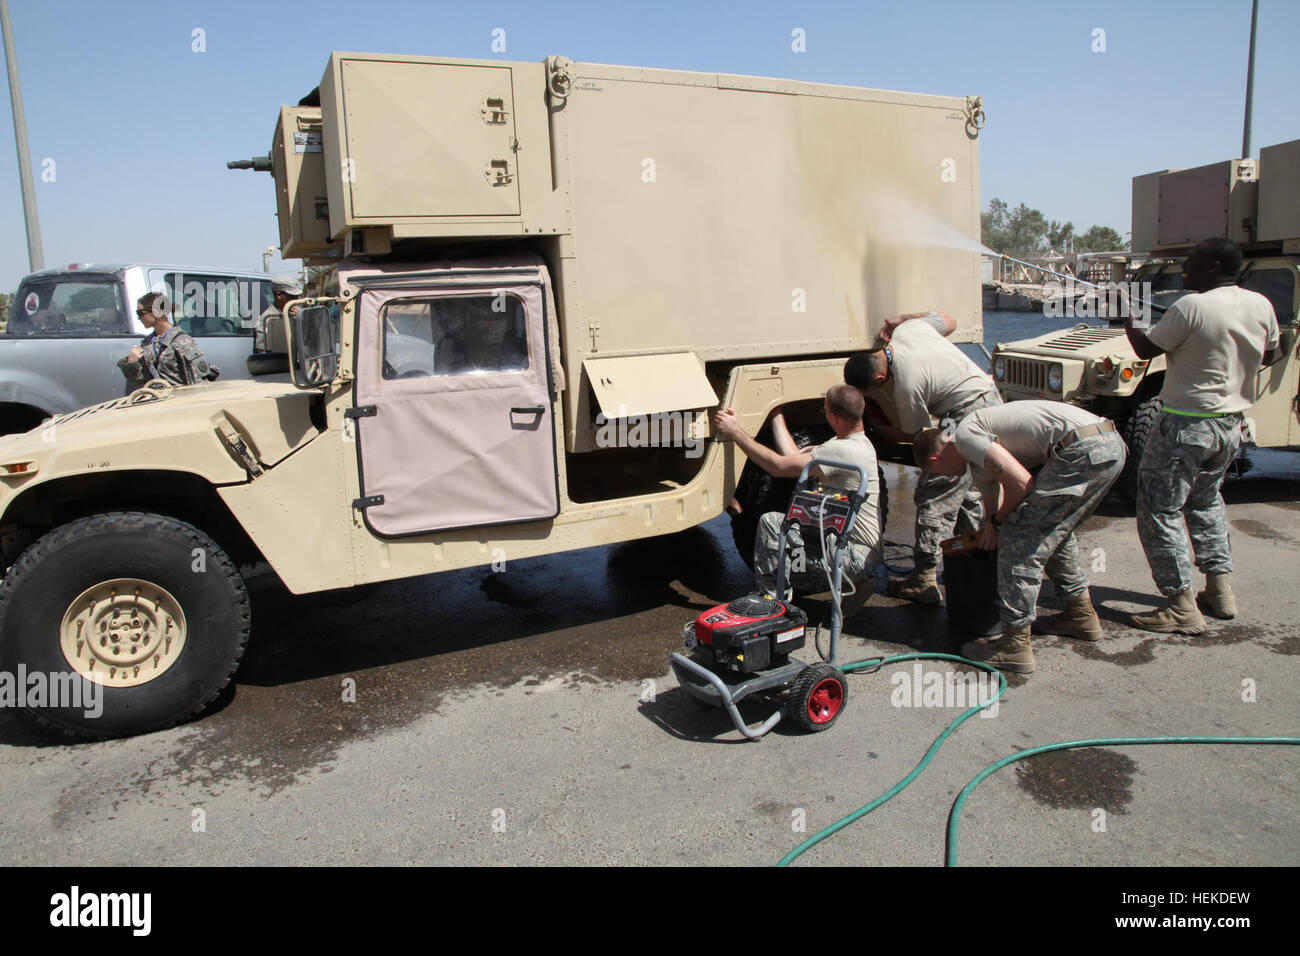 U.S. Army soldiers from the United States Forces - Iraq J2 shop clean their vehicles and equipment at Al-Faw Palace on Victory Base Complex in Baghdad, Iraq, Sept. 11, 2011. The soldiers are preparing this equipment for its return to the United States as part of the draw down in support of Operation New Dawn. (U.S. Army photo by Sgt. Matthew Friberg/Released) Troops clean vehicles on Victory Base Complex 110911-A-JL274-006 Stock Photo